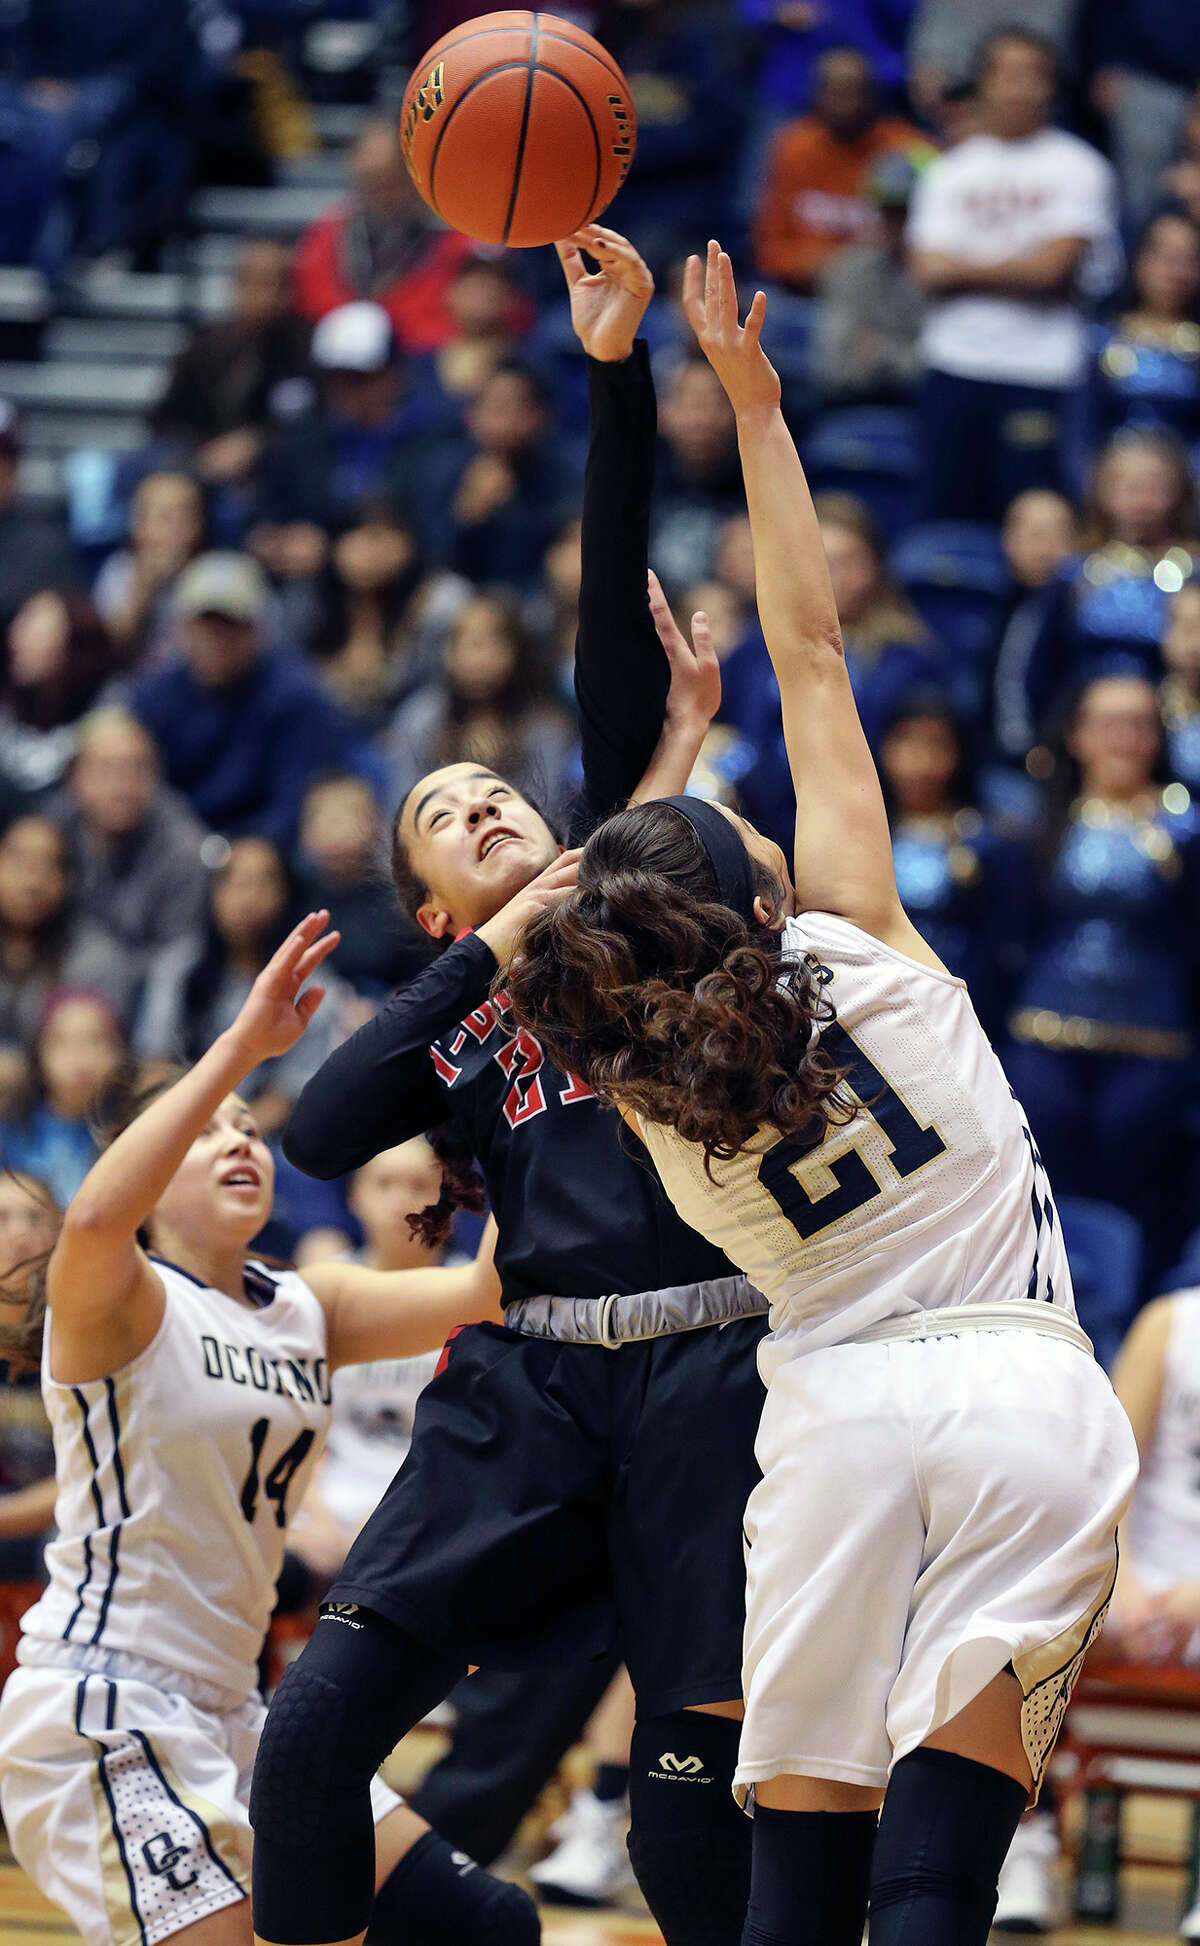 Thunderbird guard Toni Cuellar is fouled on a shot by Brianna Kallead as Wagner beats O'Connor 55-40 to win the Region IV-6A girls basketball final at the UTSA Convocation Center on February 28, 2015.